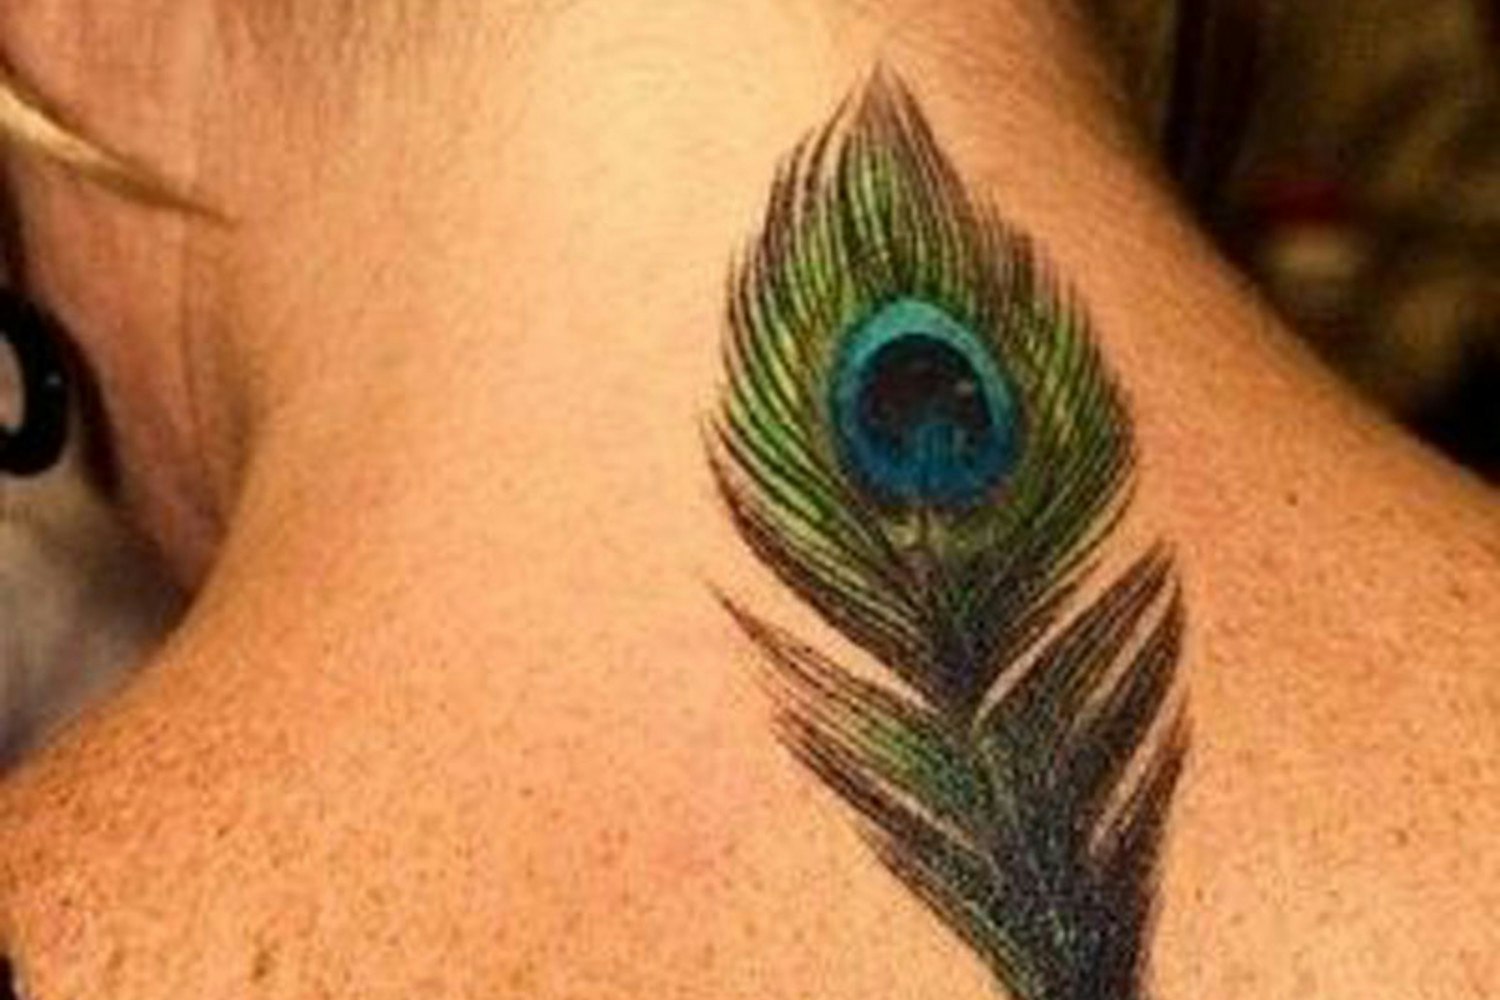 Peacock Feather Cover Up Tattoo  Ace Tattooz